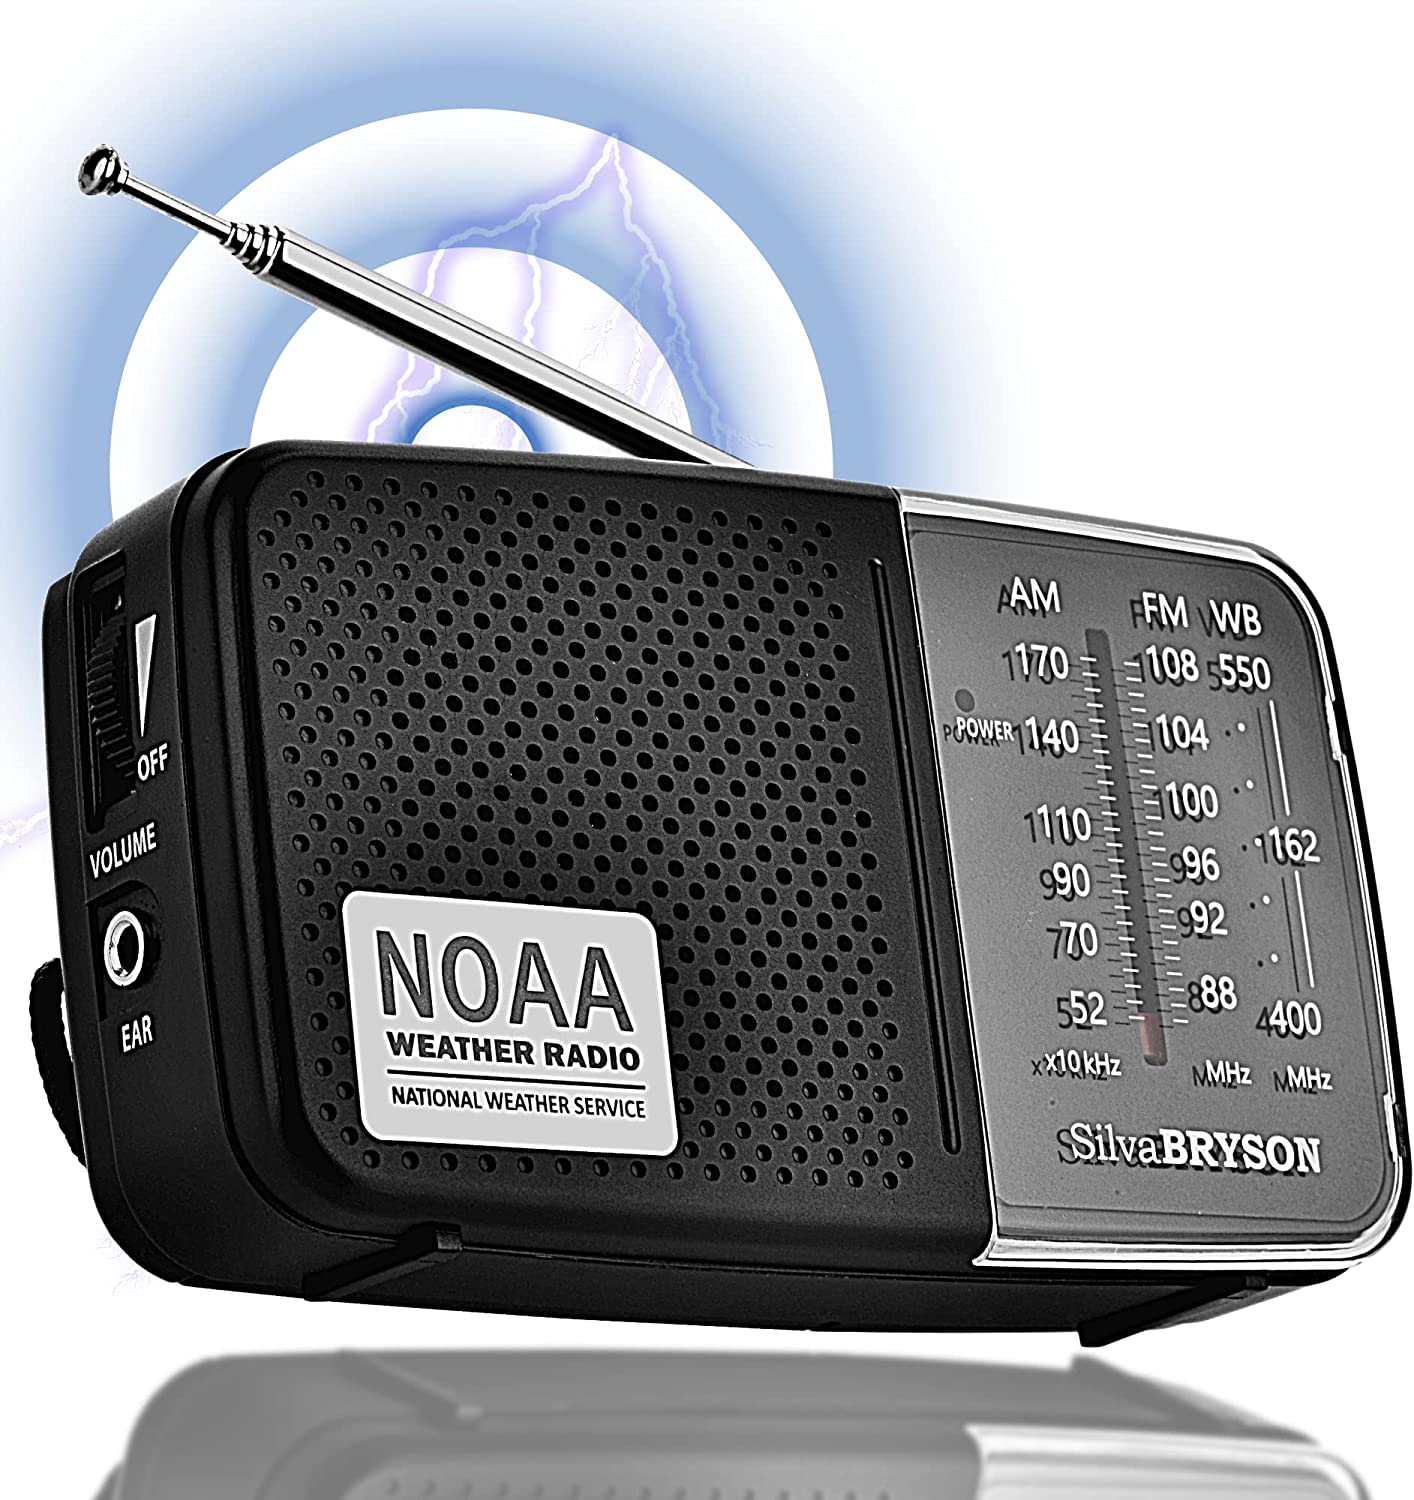 NOAA Weather Radio SilvaBRYSON, Emergency AM/FM Battery Operated Handheld Radio with Speaker and Best Reception for Hurricane, Home, Running. Convenient Headphone Jack, Operated by 2AA Battery.